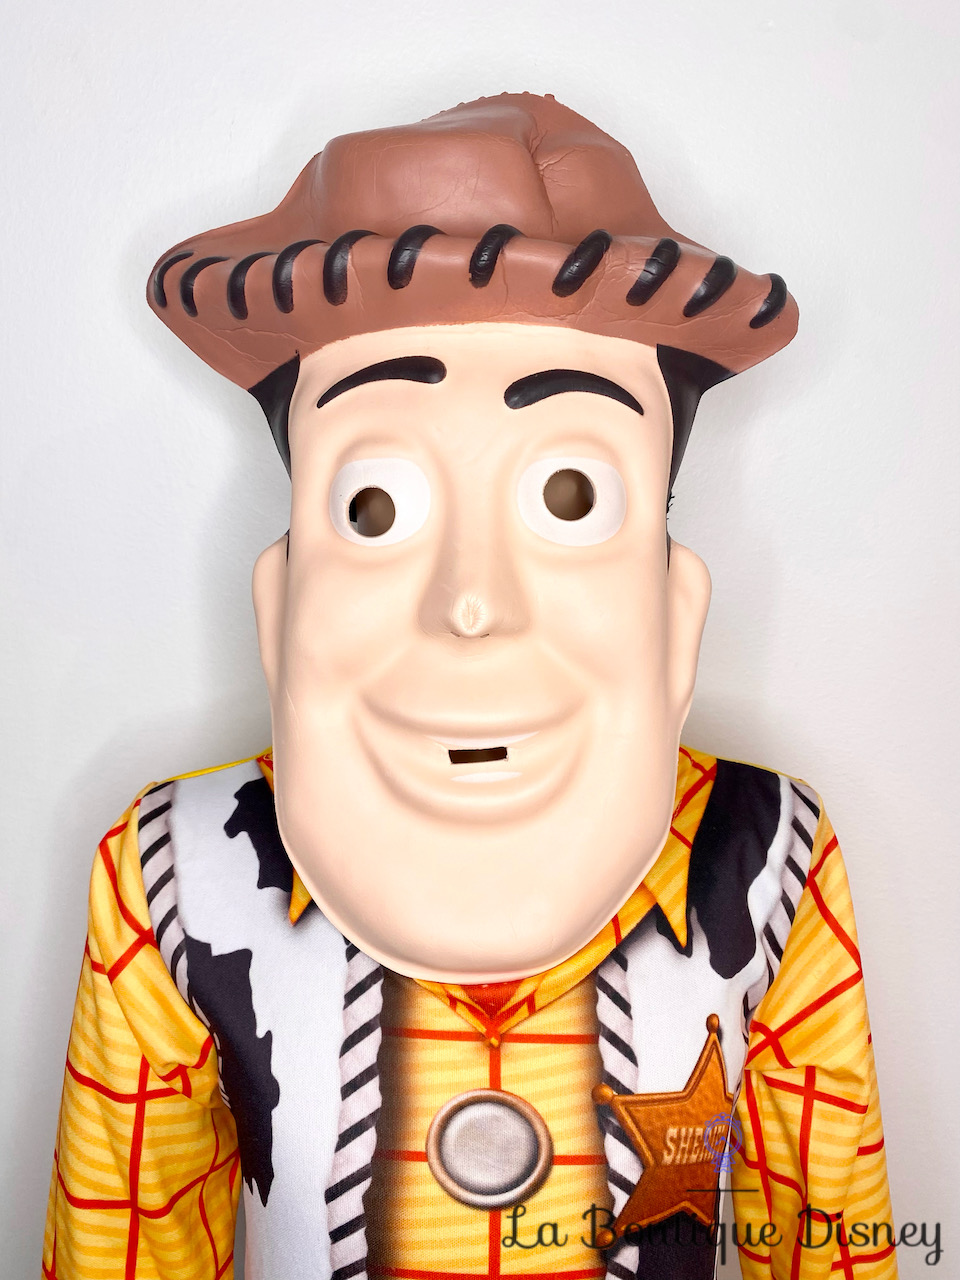 déguisement-woody-toy-story-disney-rubies-taille-3-4-ans-cow-boy-masque-12